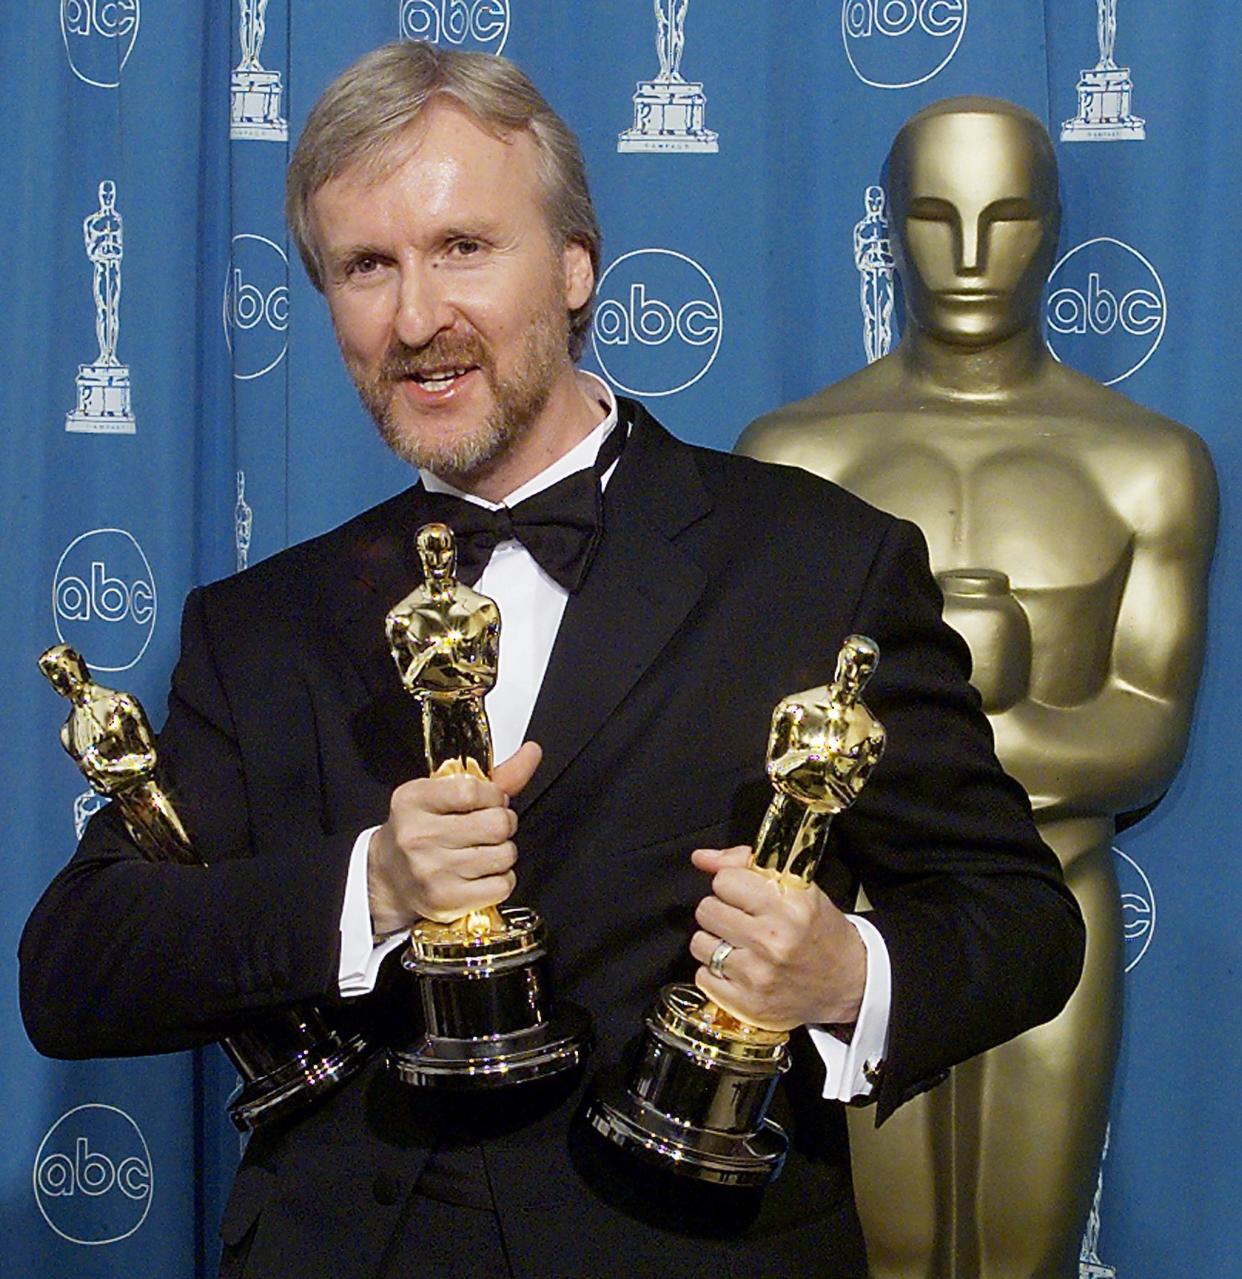 LOS ANGELES, UNITED STATES:  James Cameron holds the three Oscars he won for Best Fim, Best Director, and Best Editing 23 March at the 70th Annual Academy Awards at the Shrine Auditorium in Los Angeles.   (ELECTRONIC IMAGE)    AFP PHOTO/Hector MATA (Photo credit should read HECTOR MATA/AFP via Getty Images)